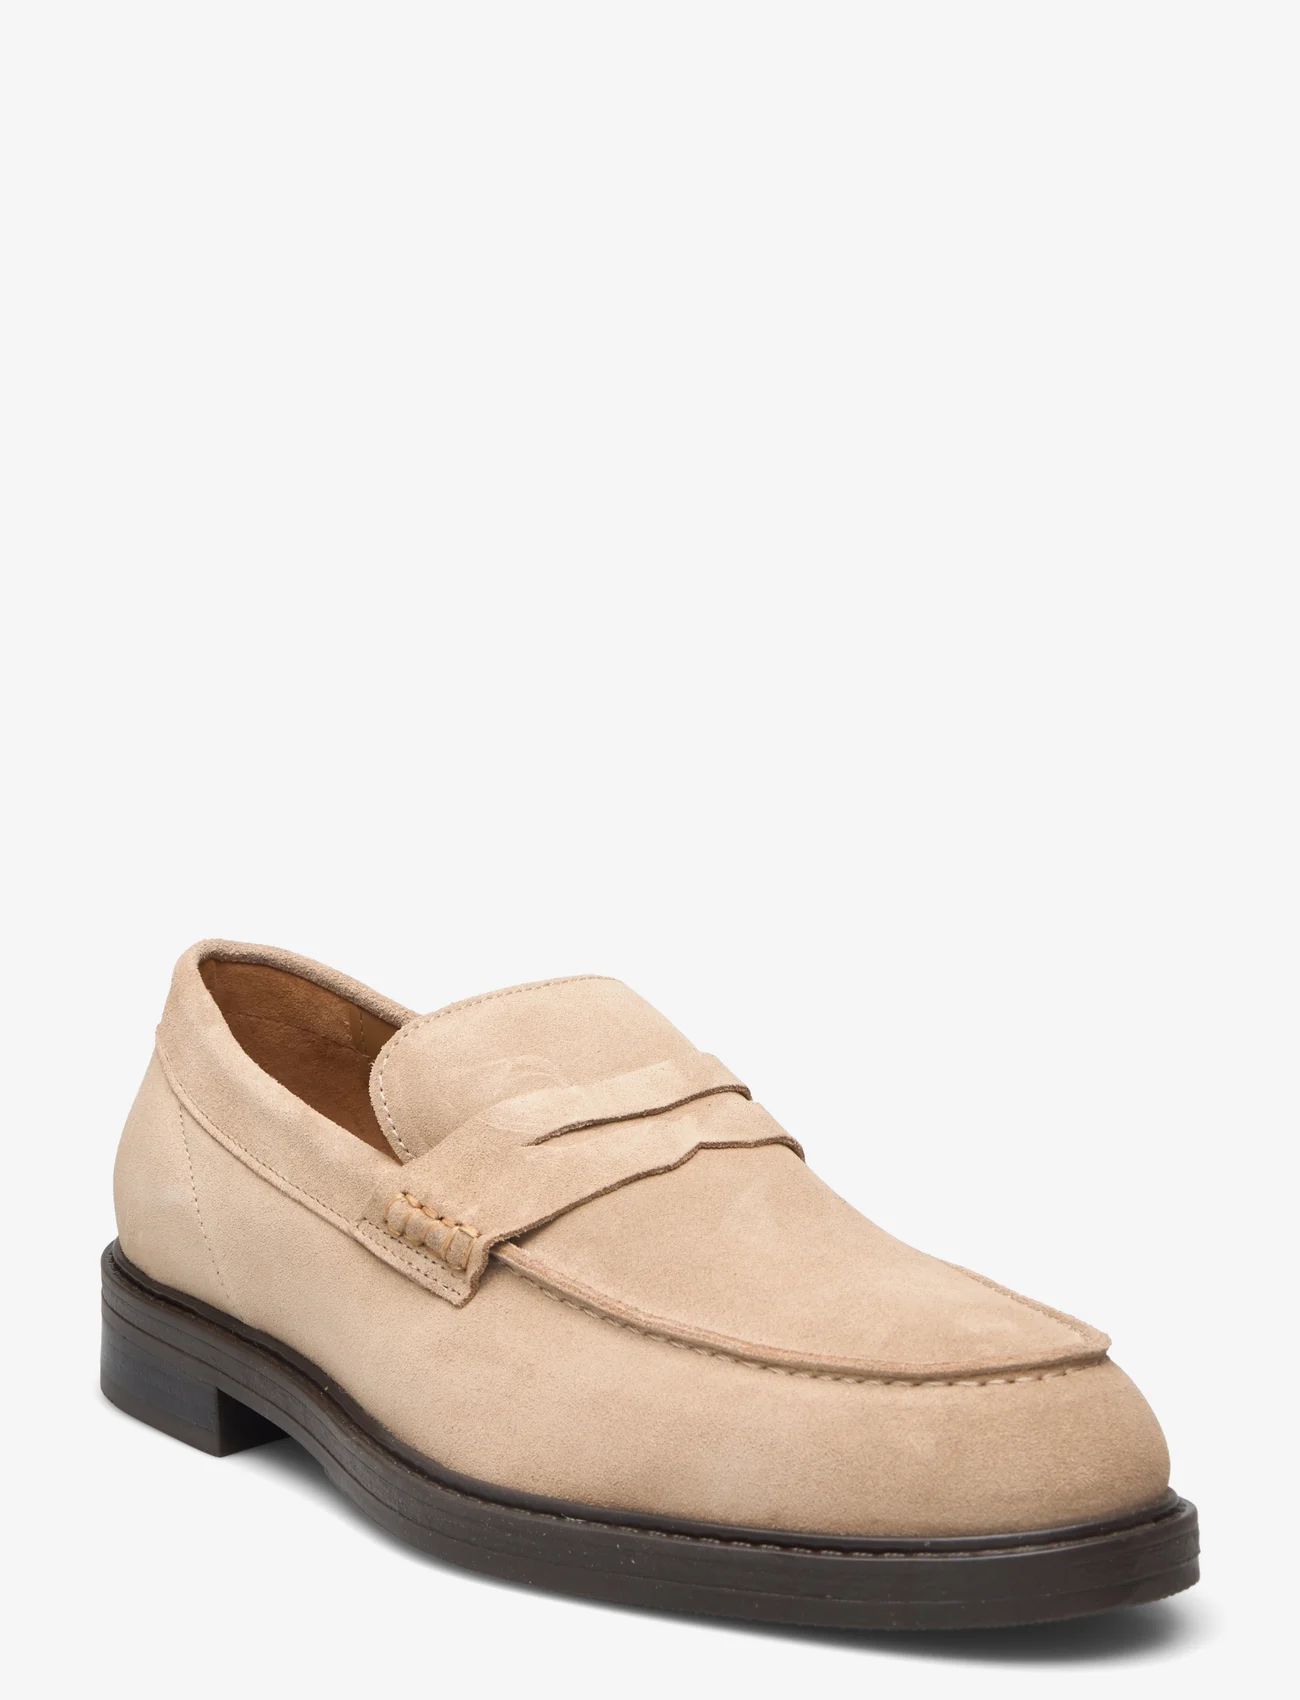 Selected Homme - SLHBLAKE SUEDE PENNY LOAFER - buty wiosenne - sand - 0